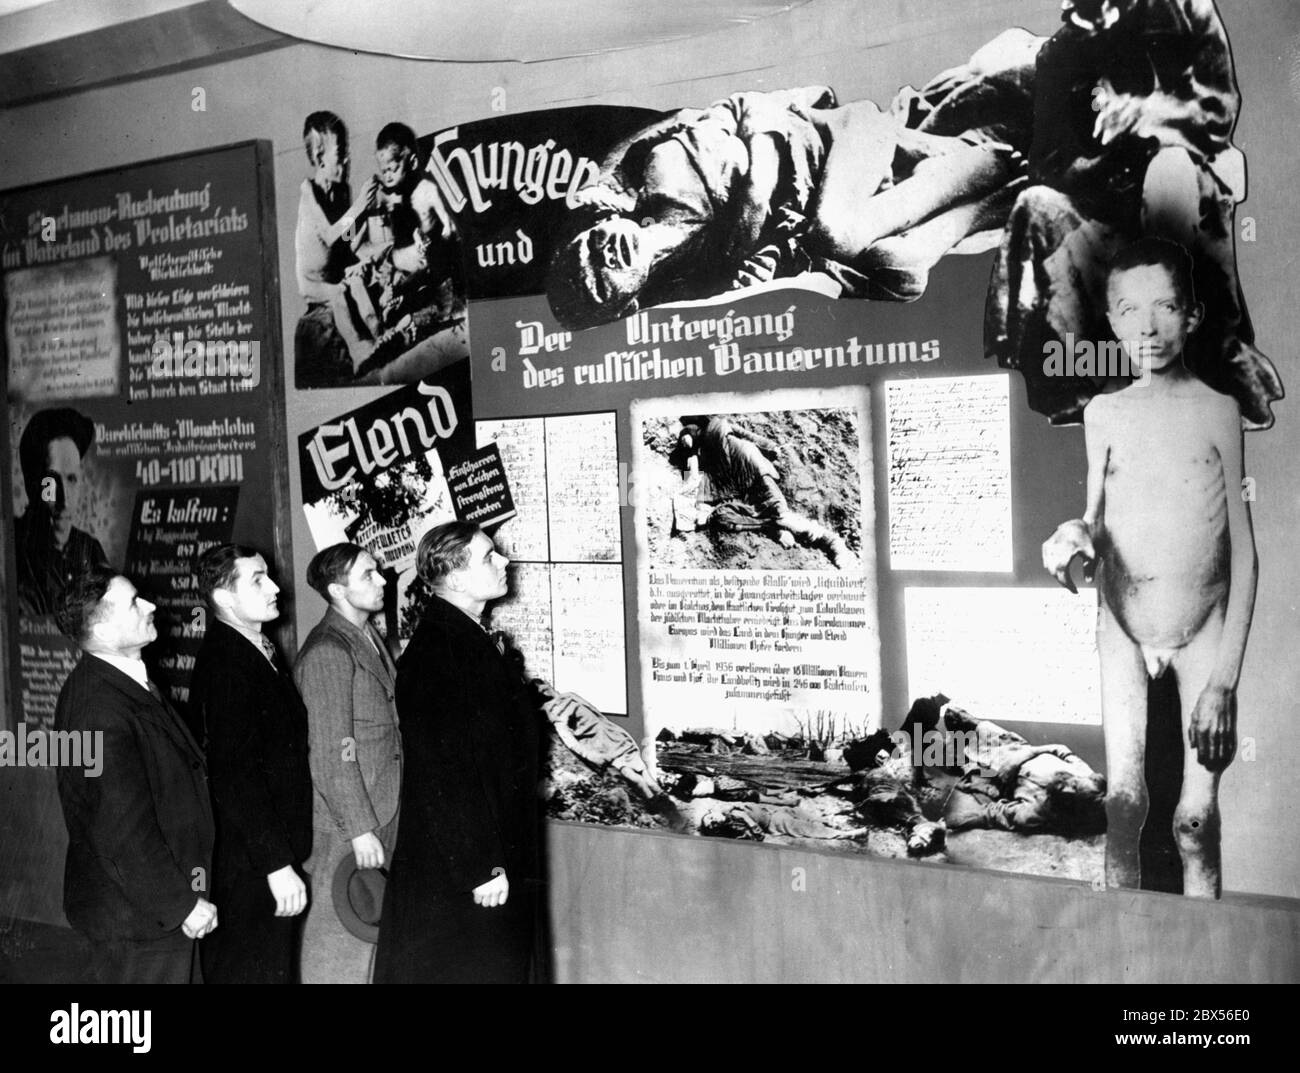 Information board at an anti-Bolshevik exhibition in the Reichstag. The information board of the National Socialist exhibition organizers explains in a propagandistic way the effects of 20 years of Soviet rule. Stock Photo